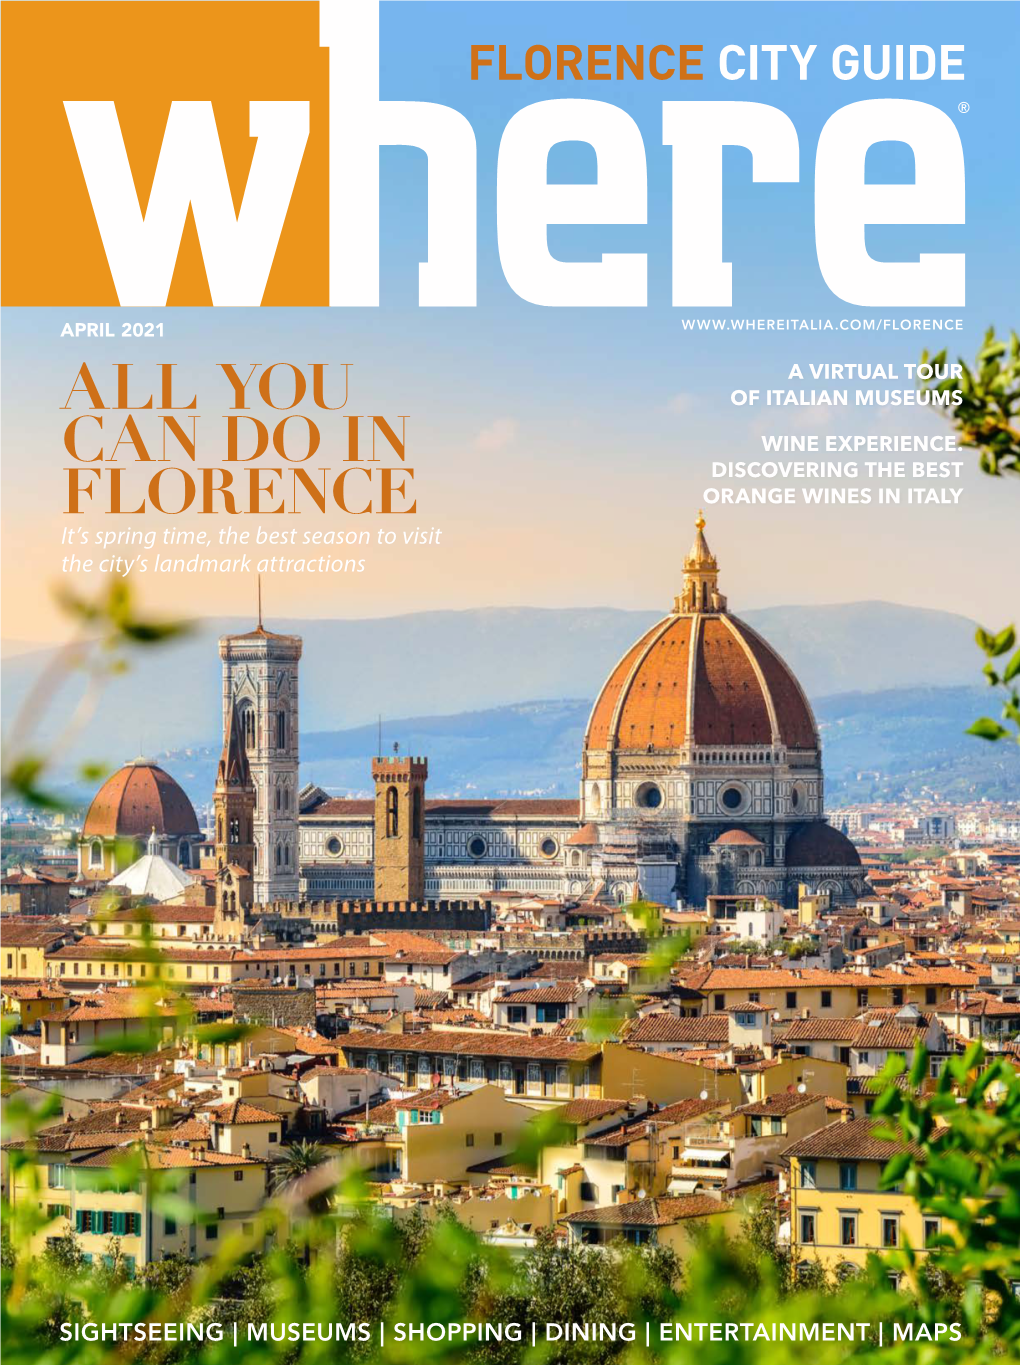 You Can Do in Florence